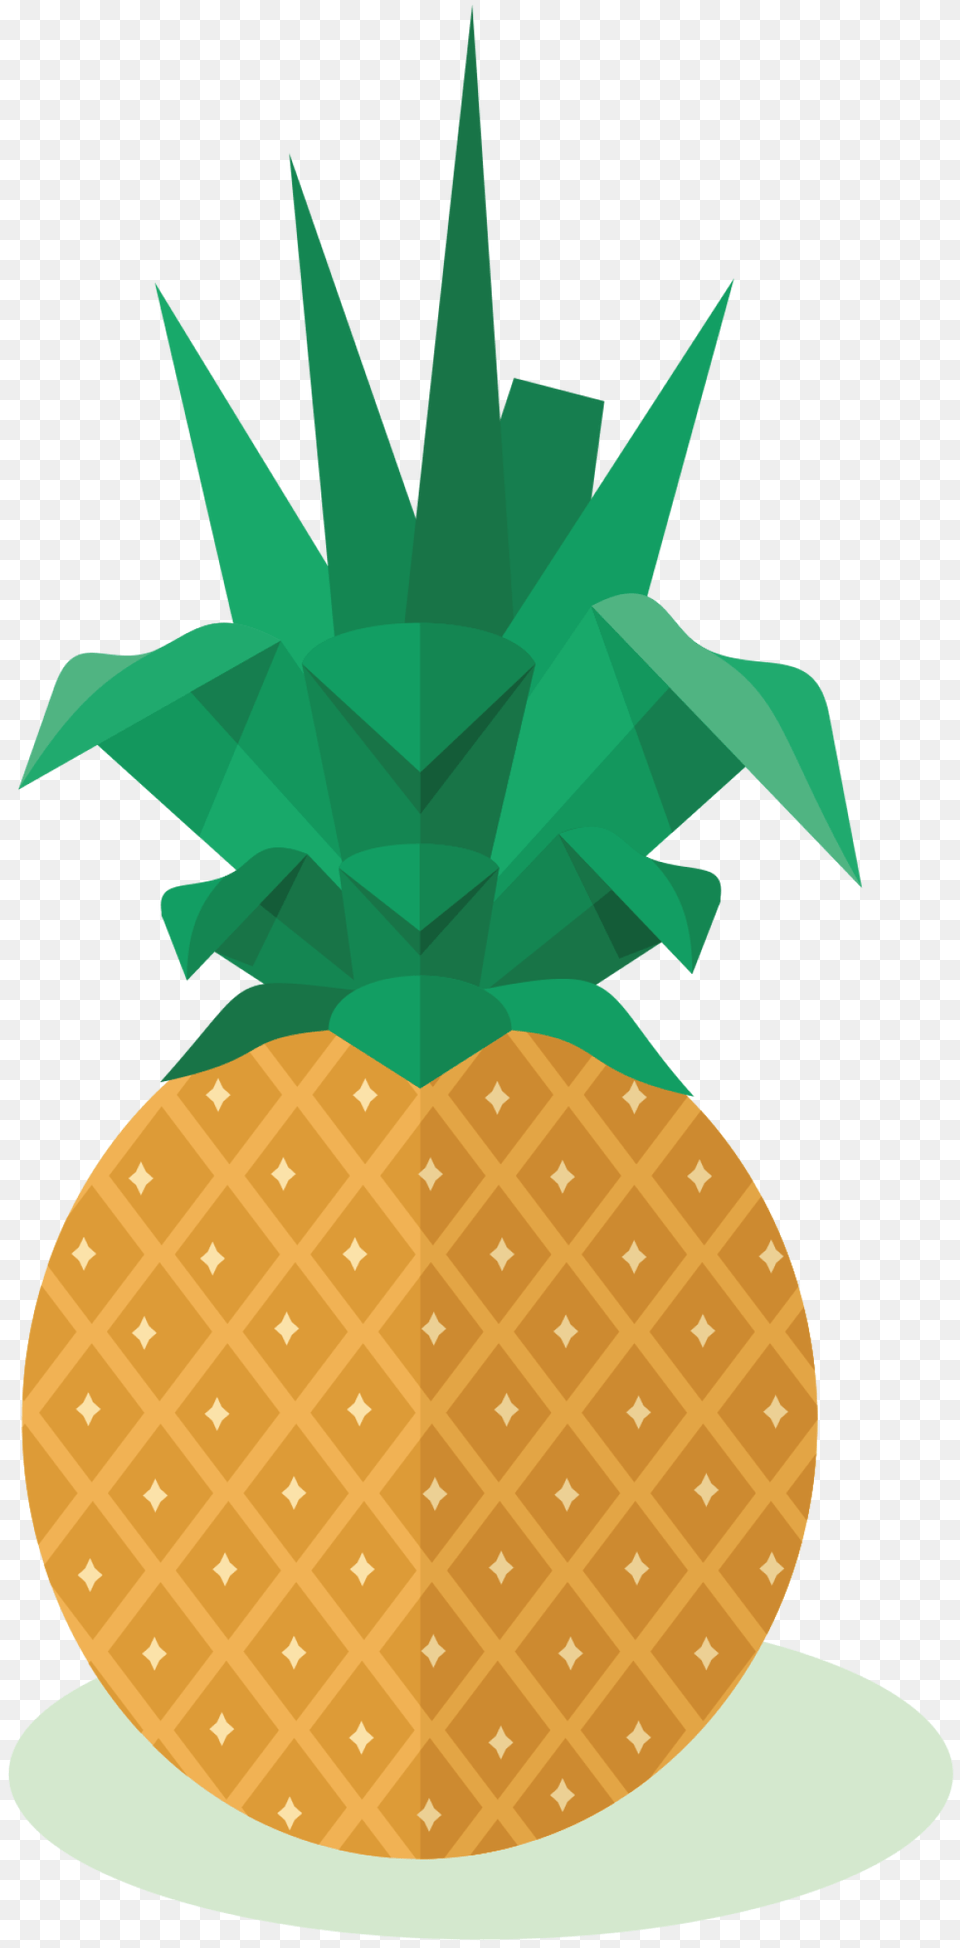 Hd Pineapple Fruit Clipart Of Pineapple, Food, Plant, Produce Free Png Download